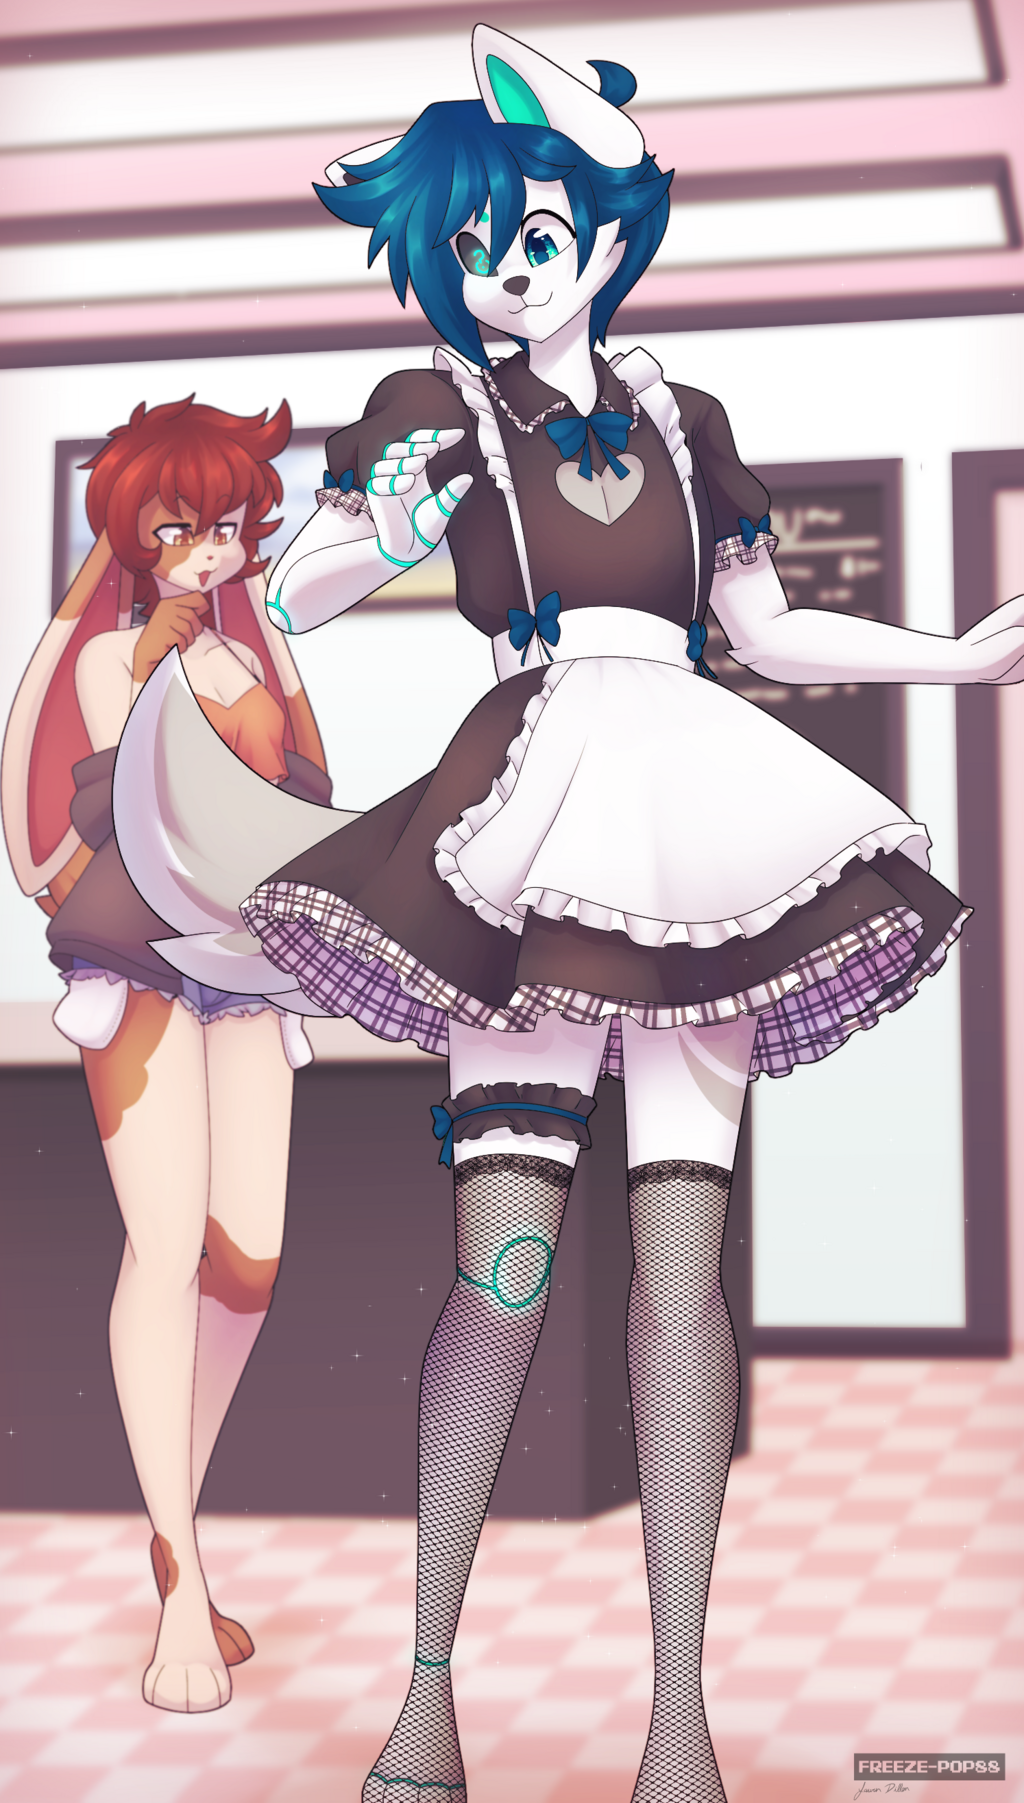 [COMMISSION] Maid outfit